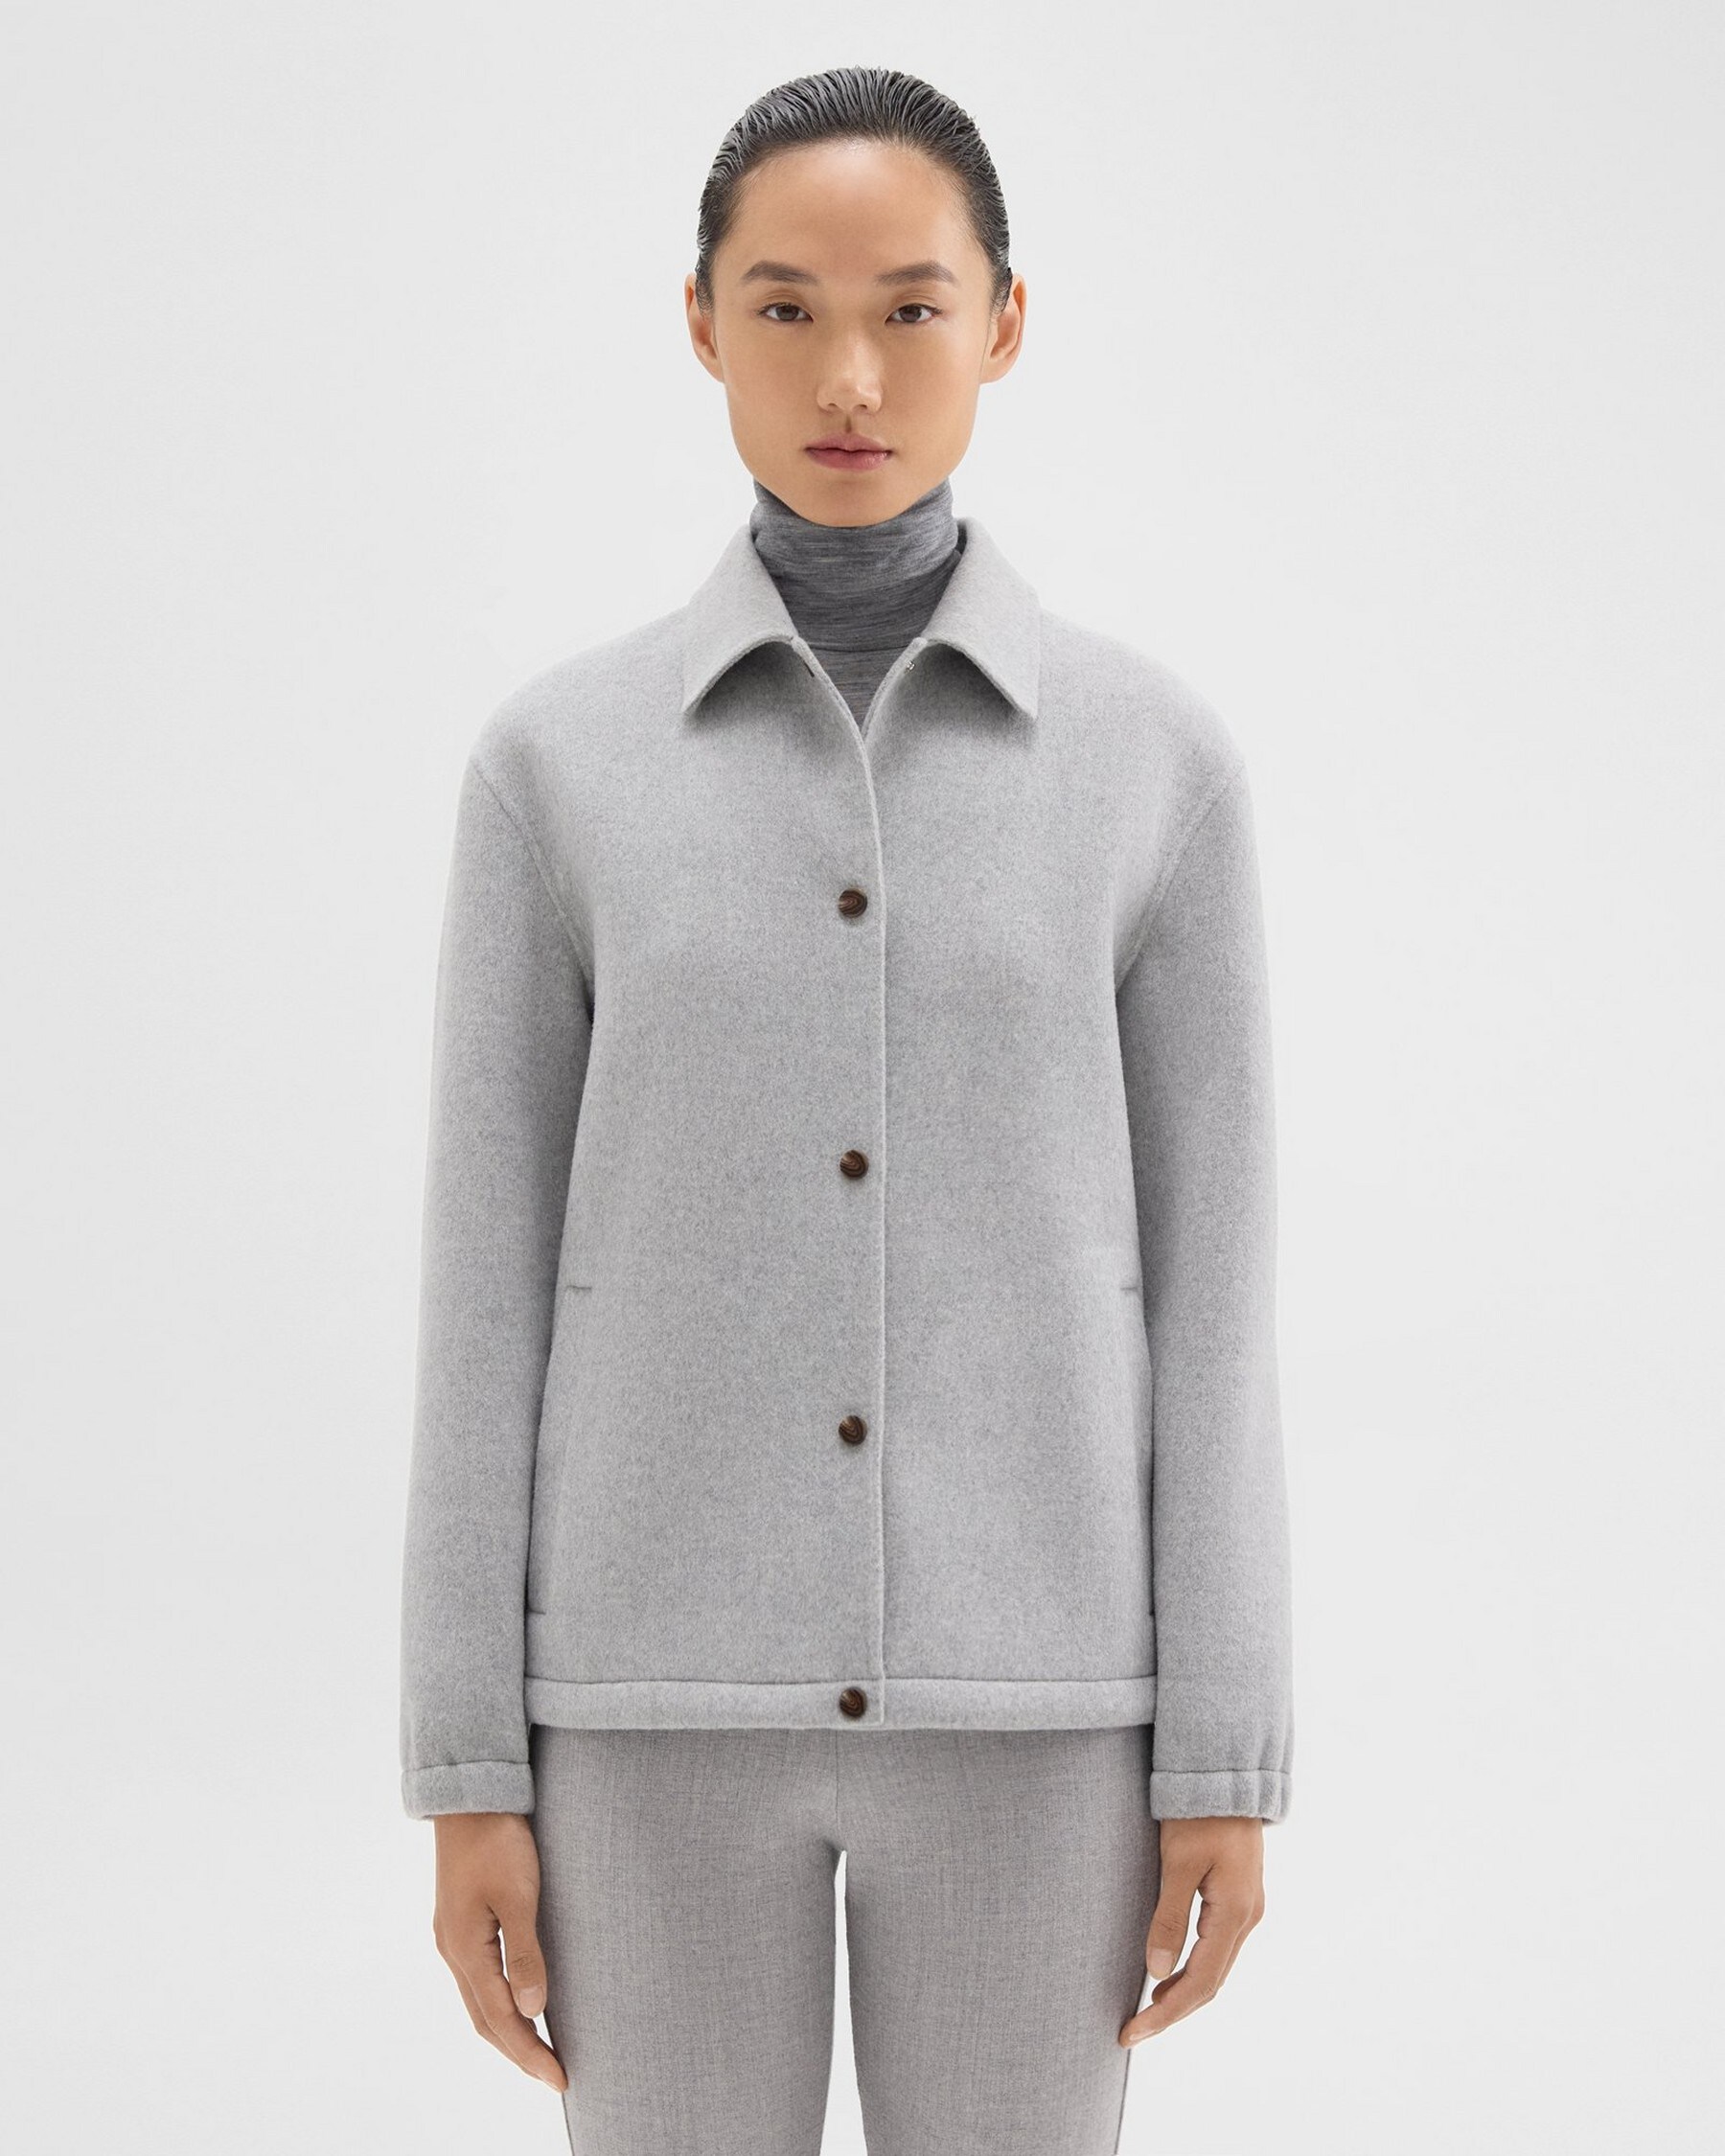 Theory Coaches Jacket in Double-Face Wool-Cashmere